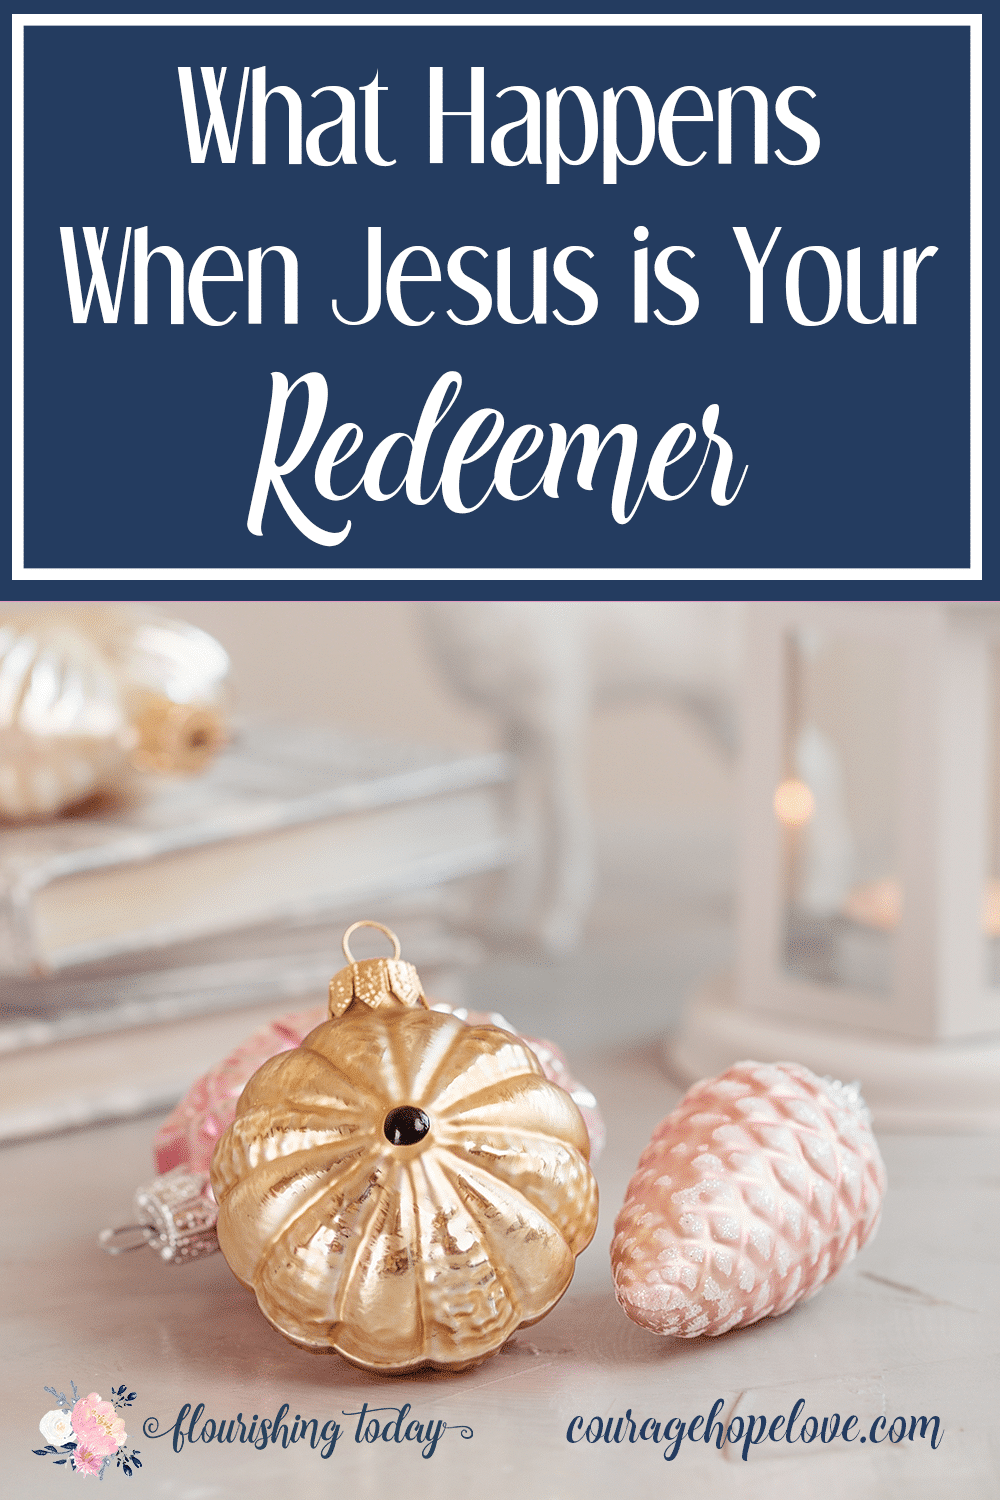 What does it mean that Jesus is our Redeemer? How does that affect us? Join us for a study on the names of Jesus and learn who He is as your Redeemer.